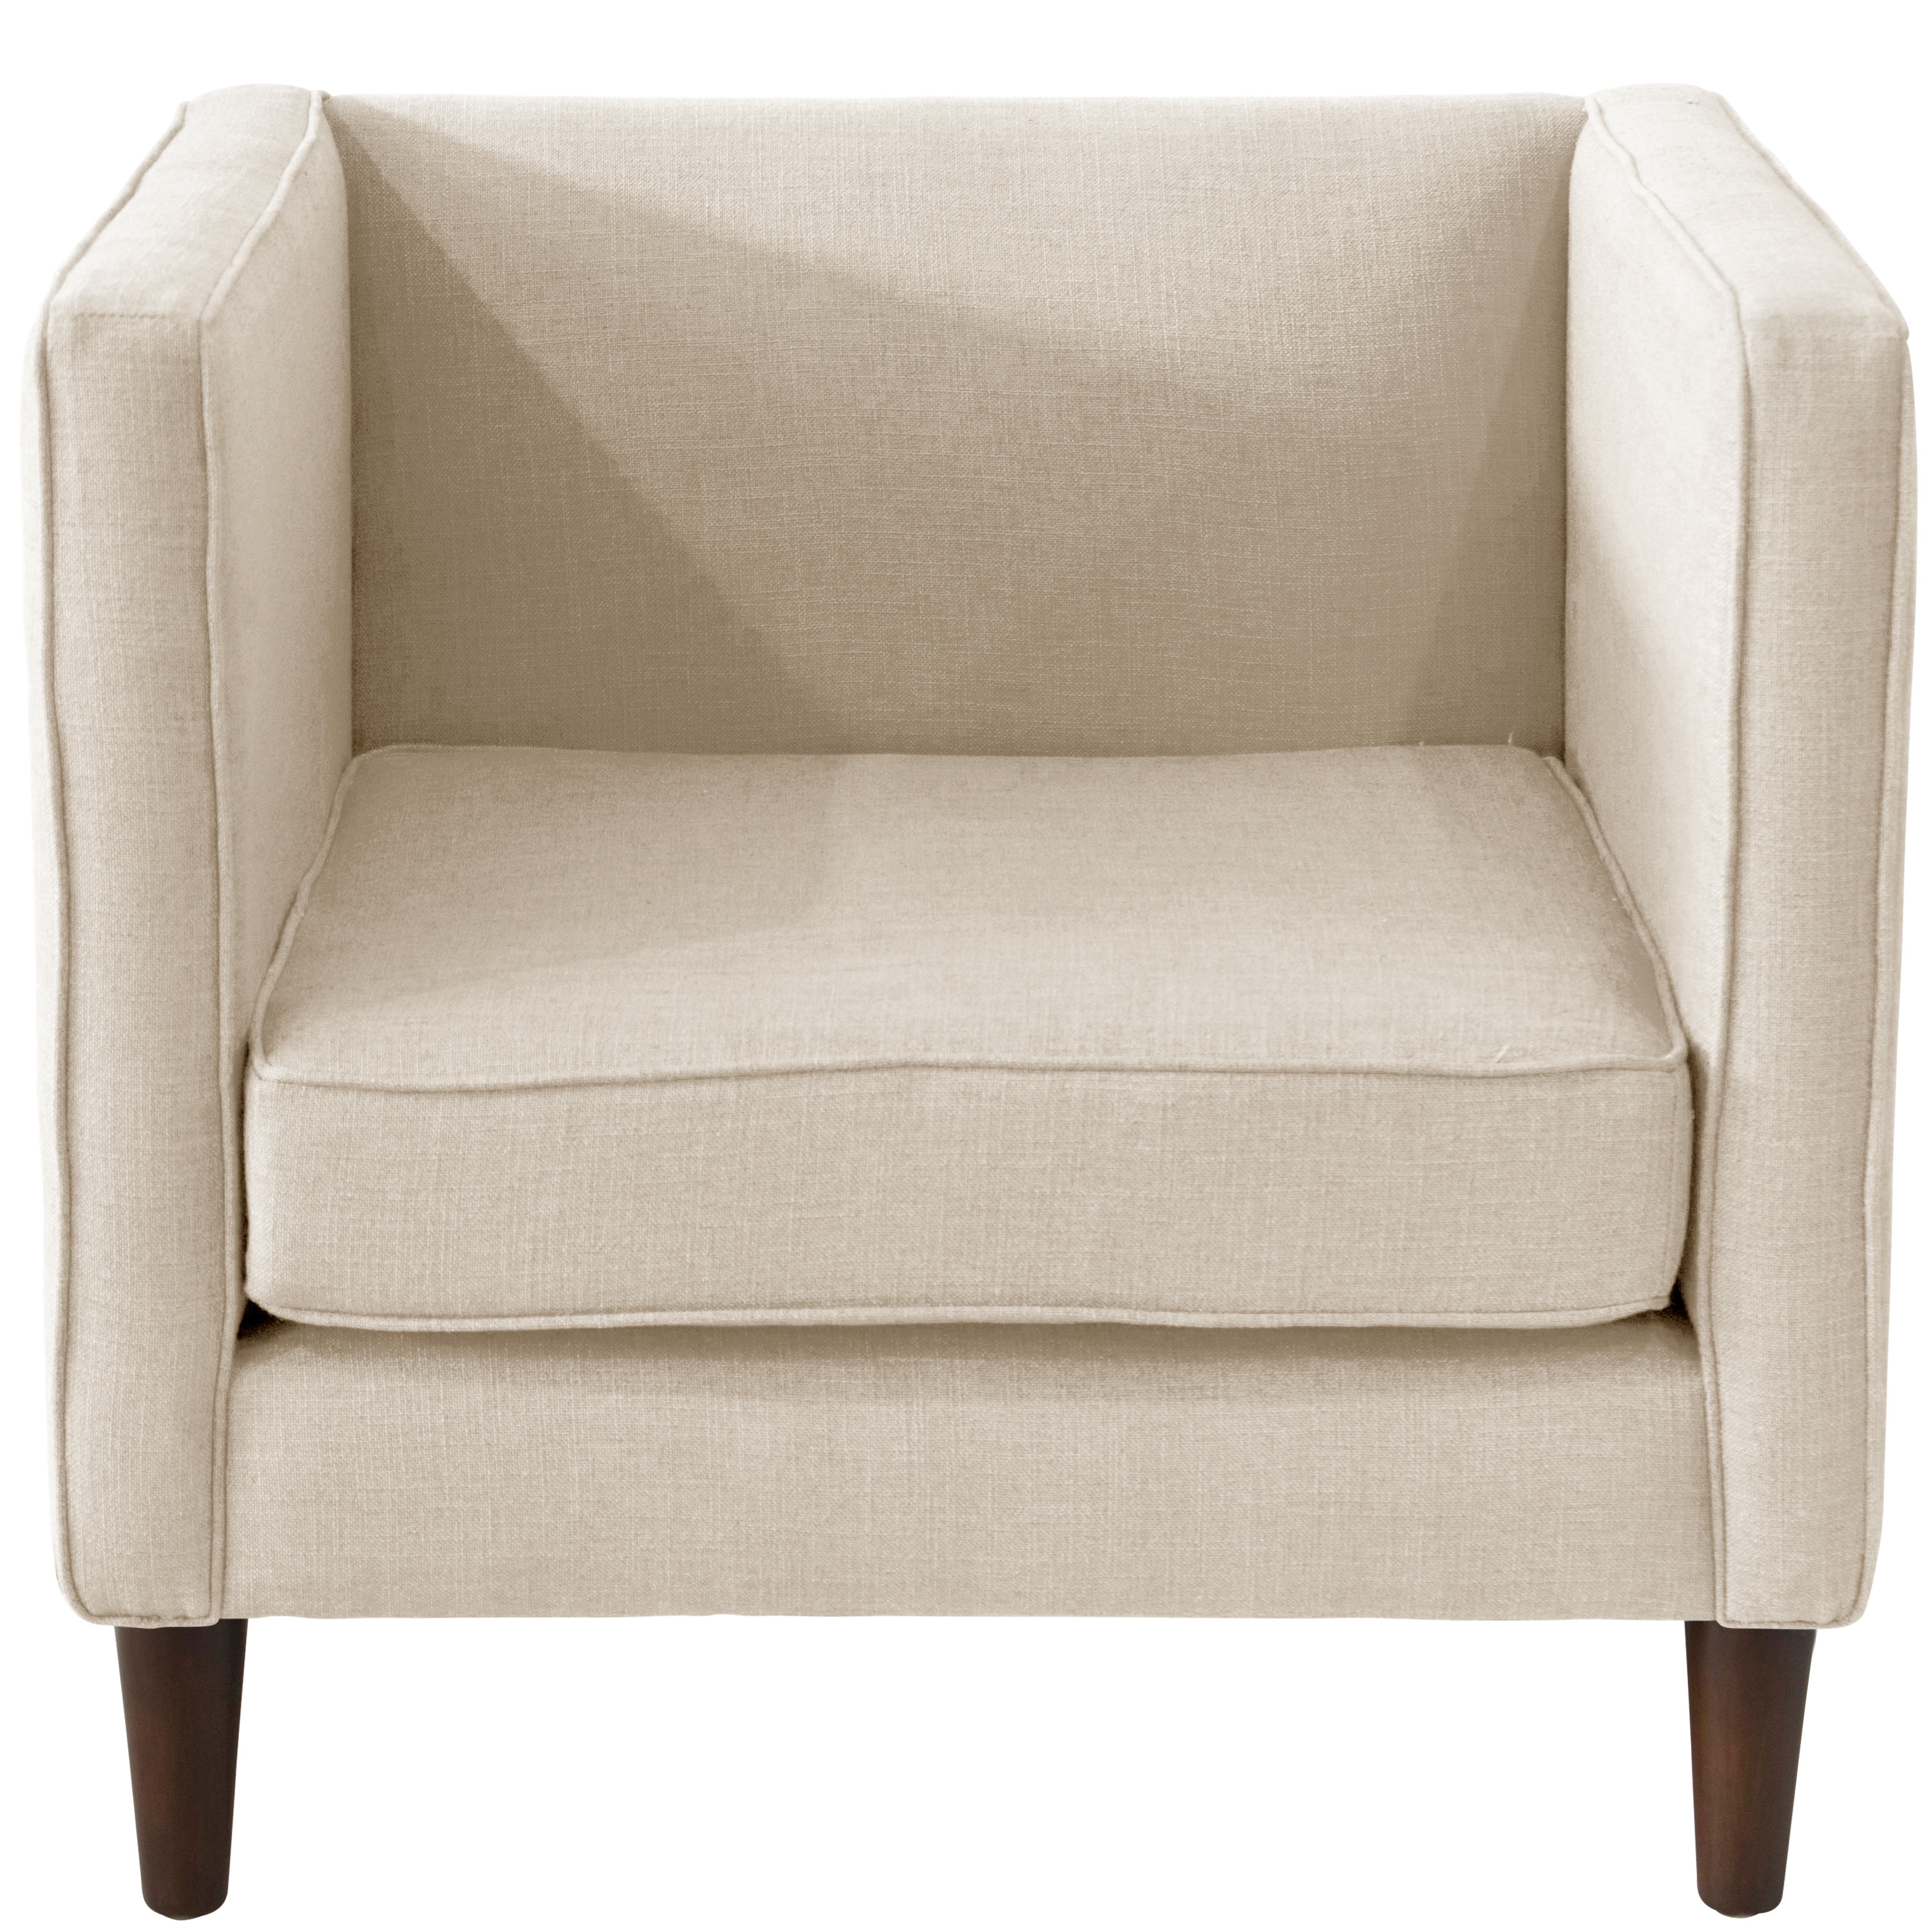 Humboldt Chair, White - Image 1